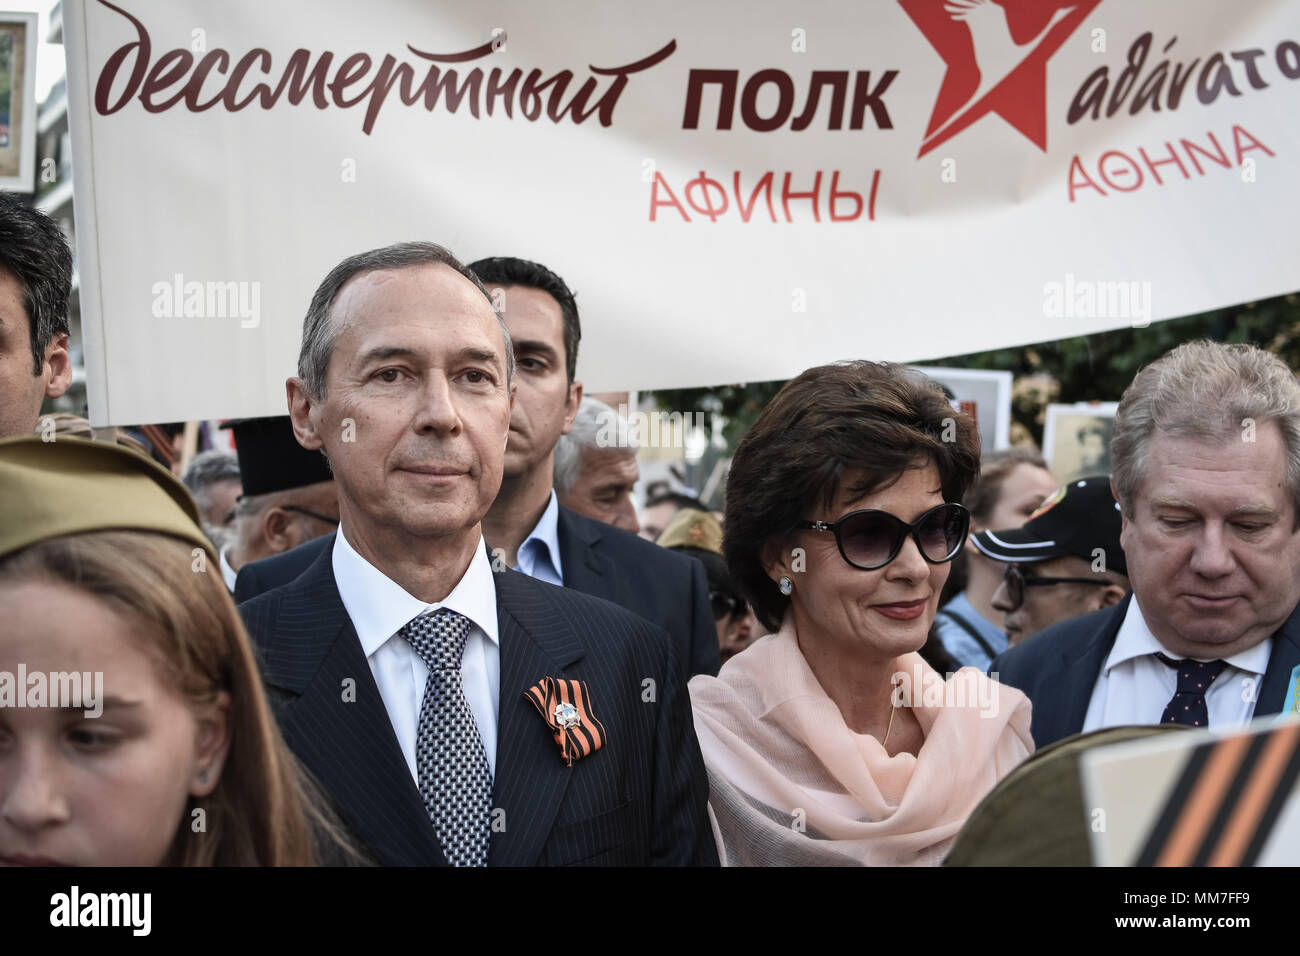 The Russian Ambassador, Andrey Maslov during The Immortal Regiment march. Thousands of Russian citizens participated in the celebrations for the 73rd anniversary of the victory against fascism, which has been established as a Victory Day. With the military parade as well as the demonstration, the festive event took place across Russia, with citizens holding photos of their relatives who have either fought or been killed during the World War. Stock Photo